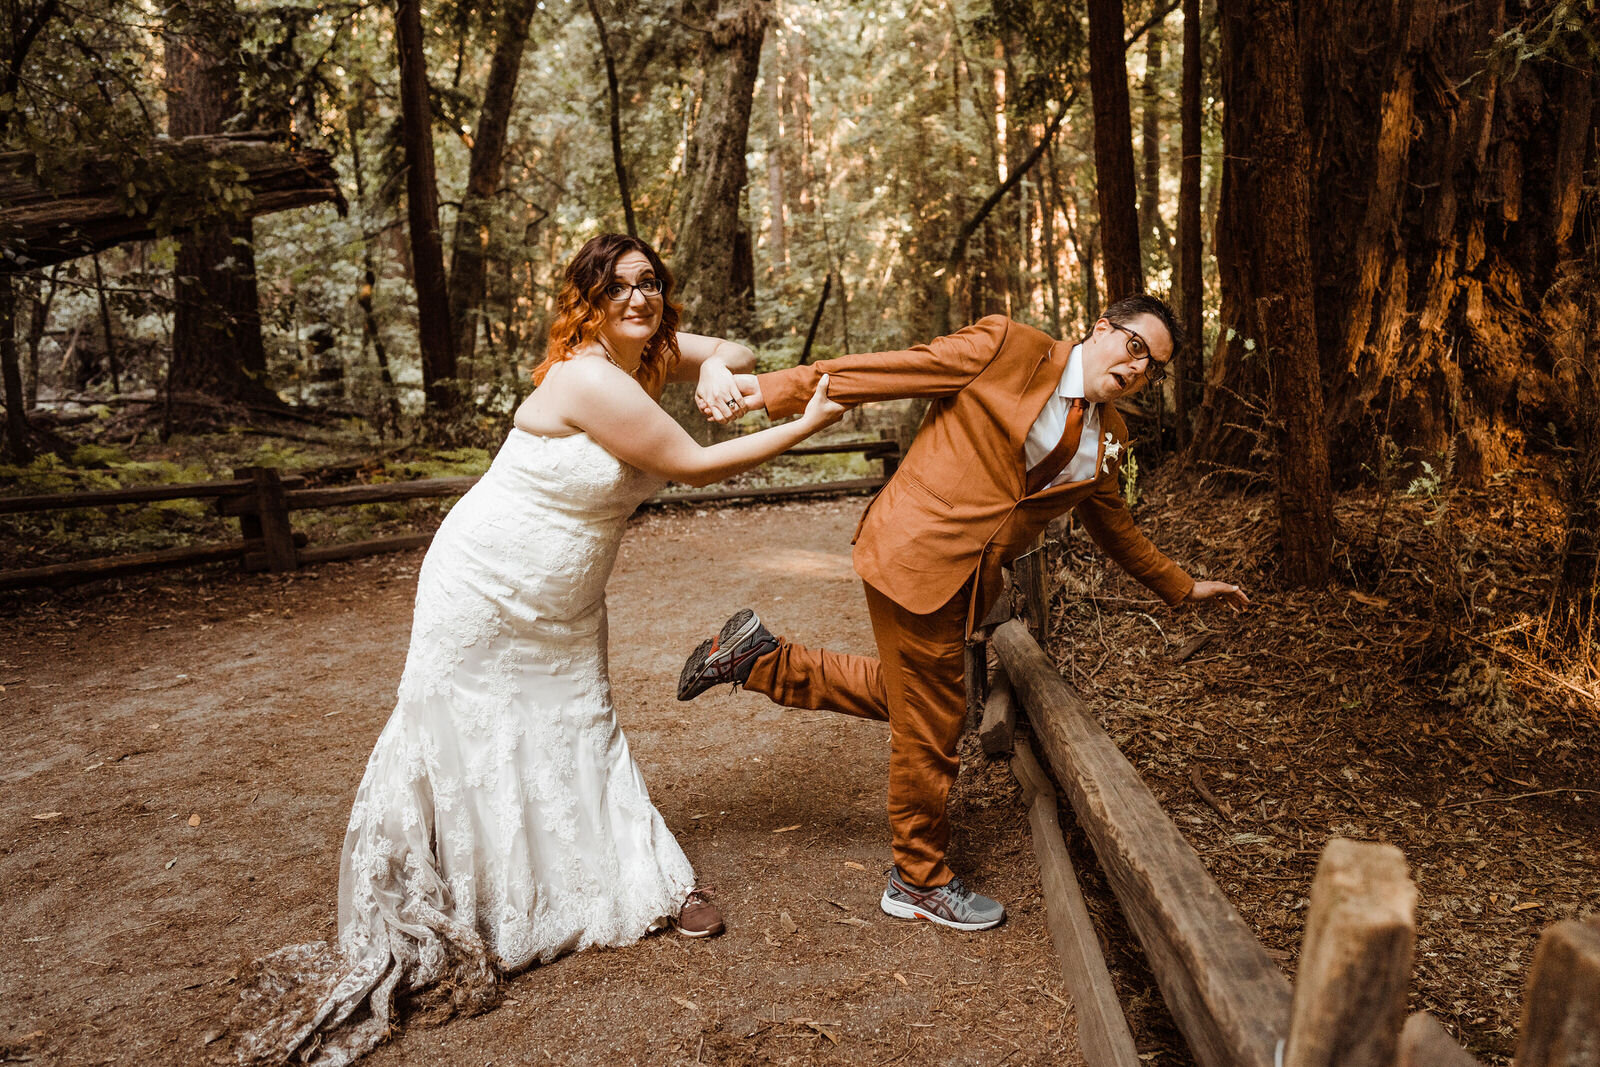 Henry-Cowell-Redwoods-State-Park-Wedding-Santa-Cruz-Bride-and-Groom-Roll-Survival-World-of-Warcraft-Silly-Photo.jpg